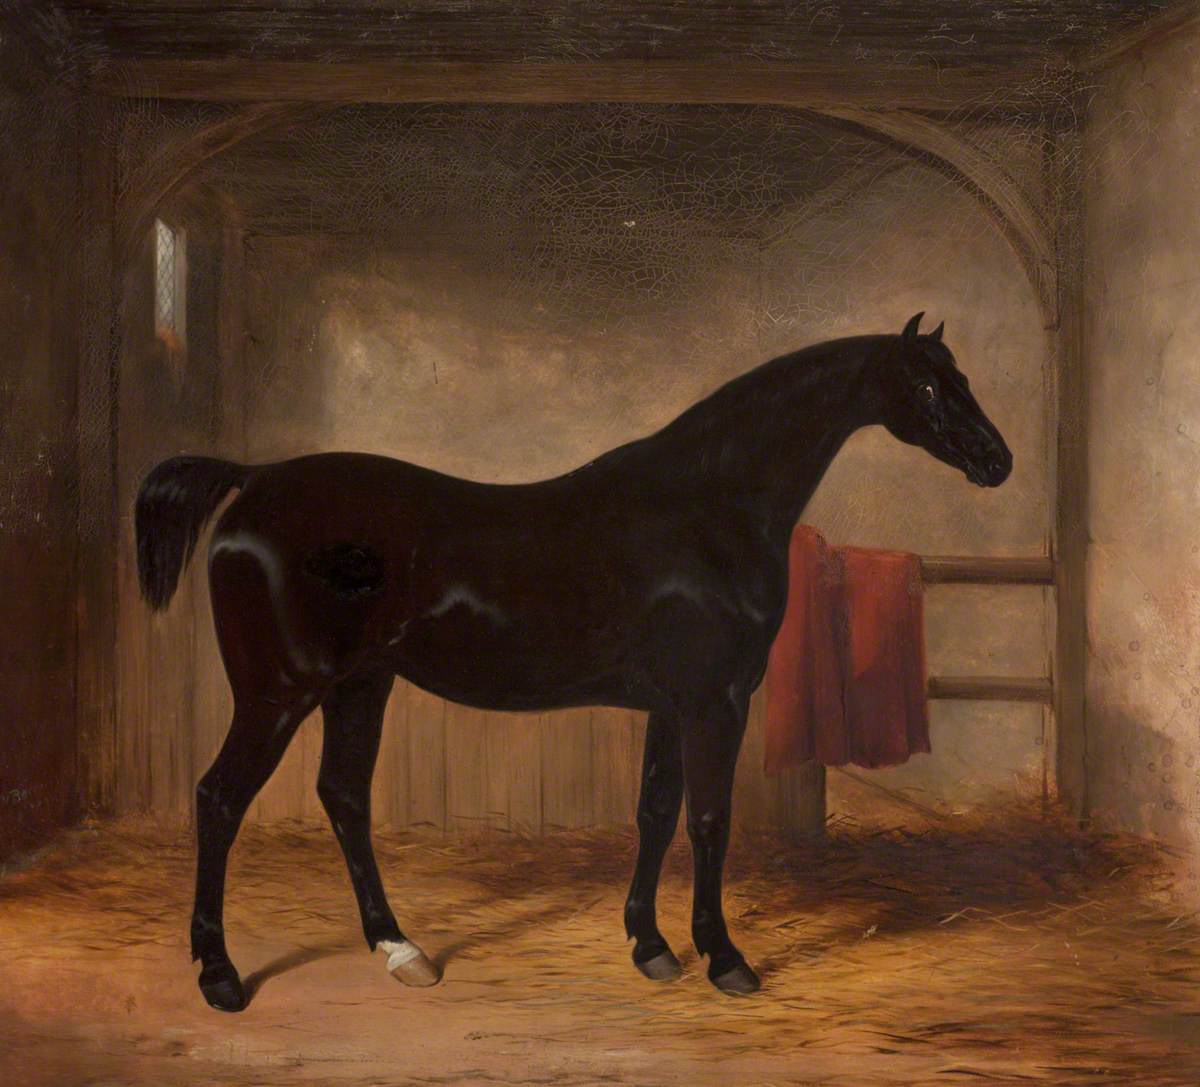 Black Horse in a Loose Box